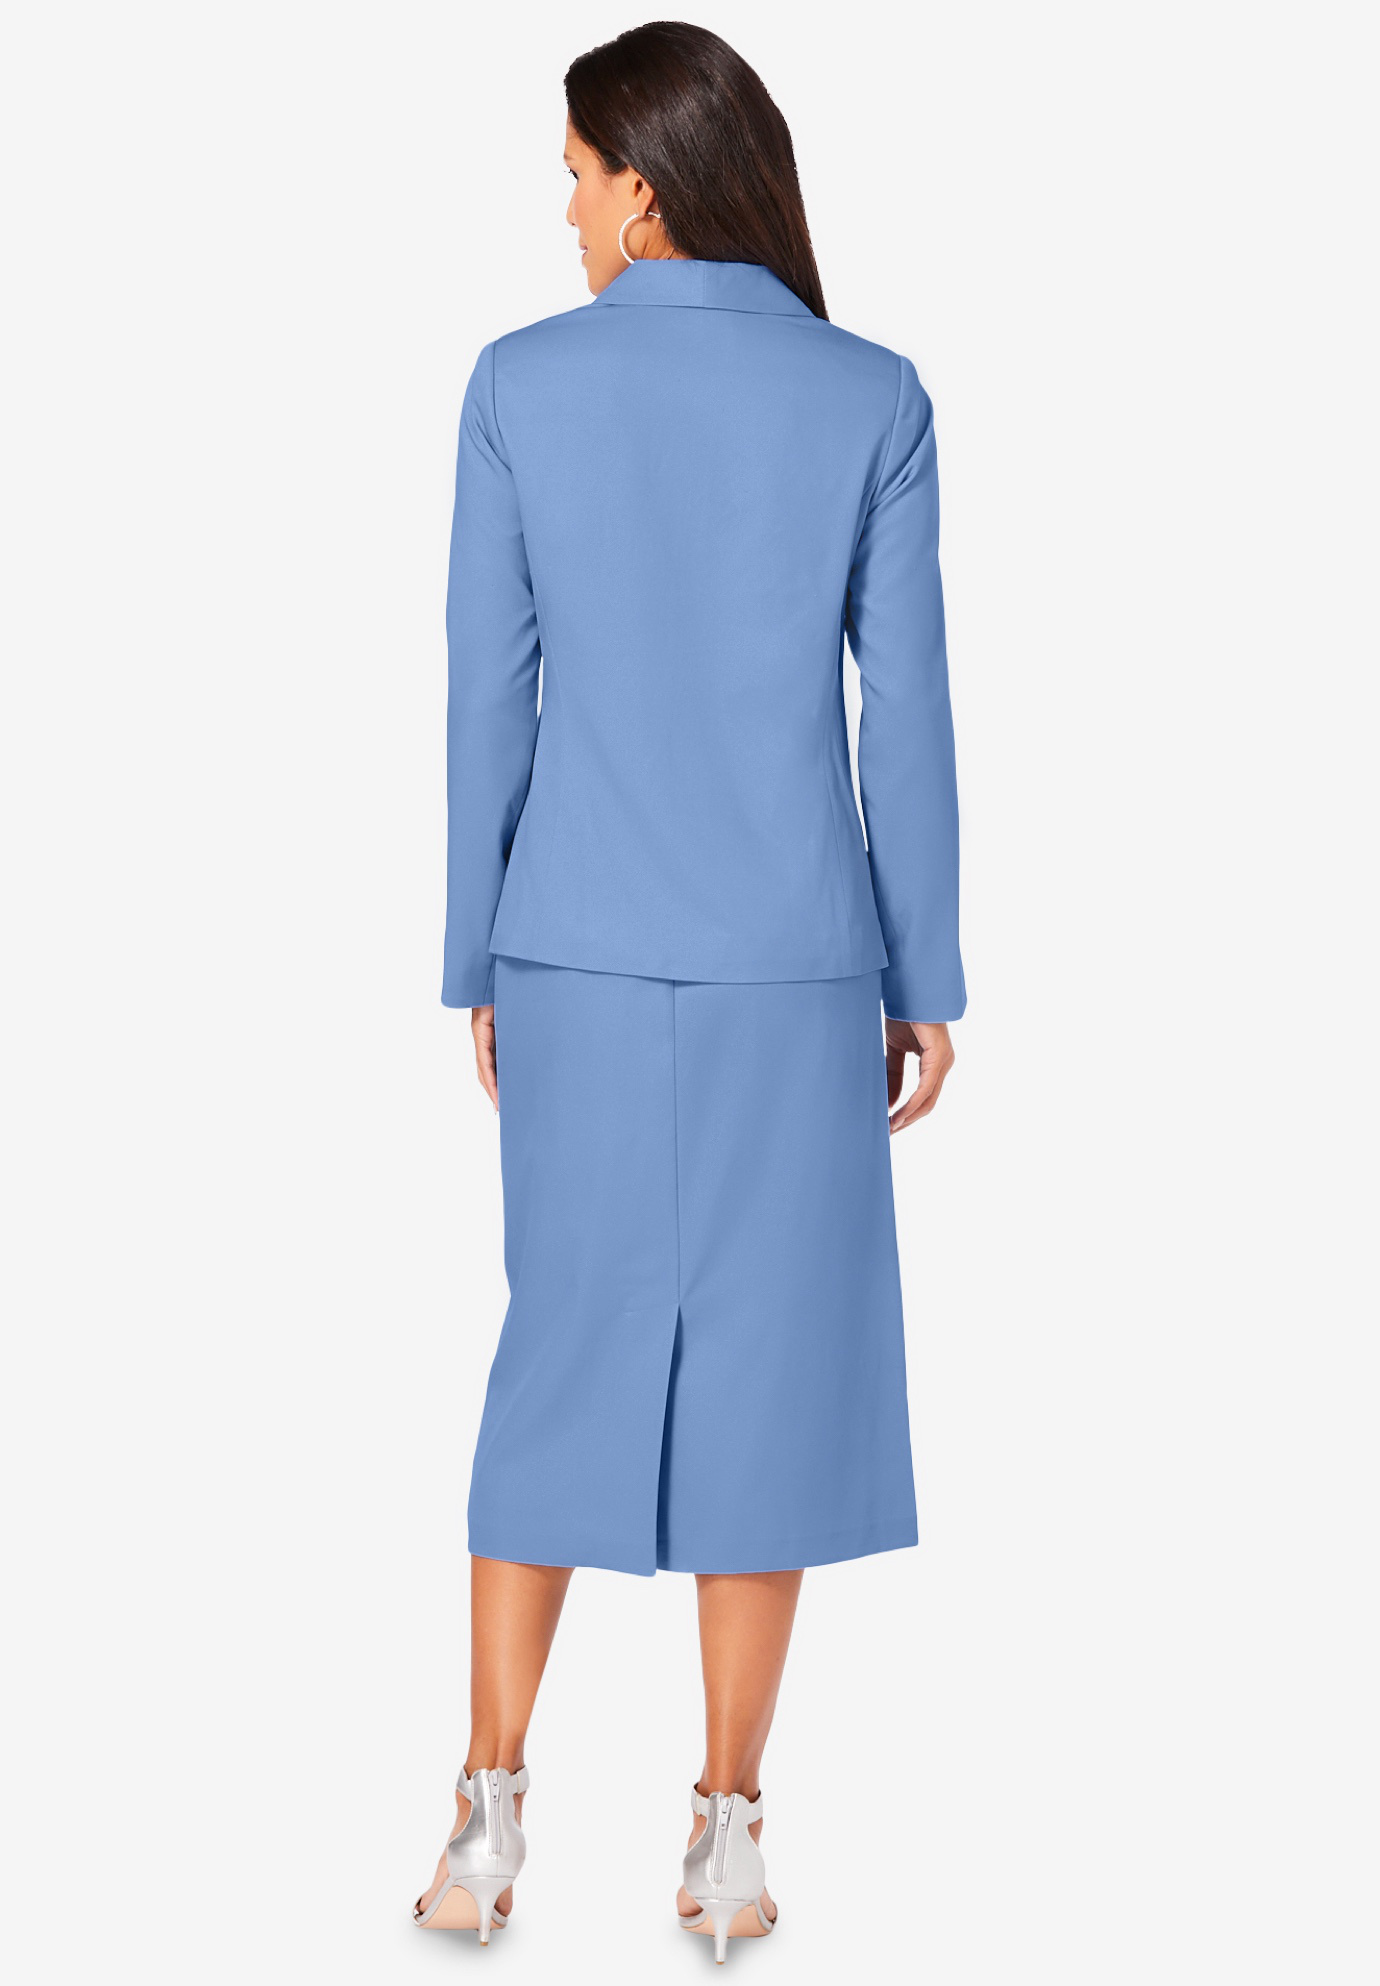 Roaman's Women's Plus Size Two-Piece Skirt Suit With Shawl-Collar Jacket Skirt Suit - image 3 of 5